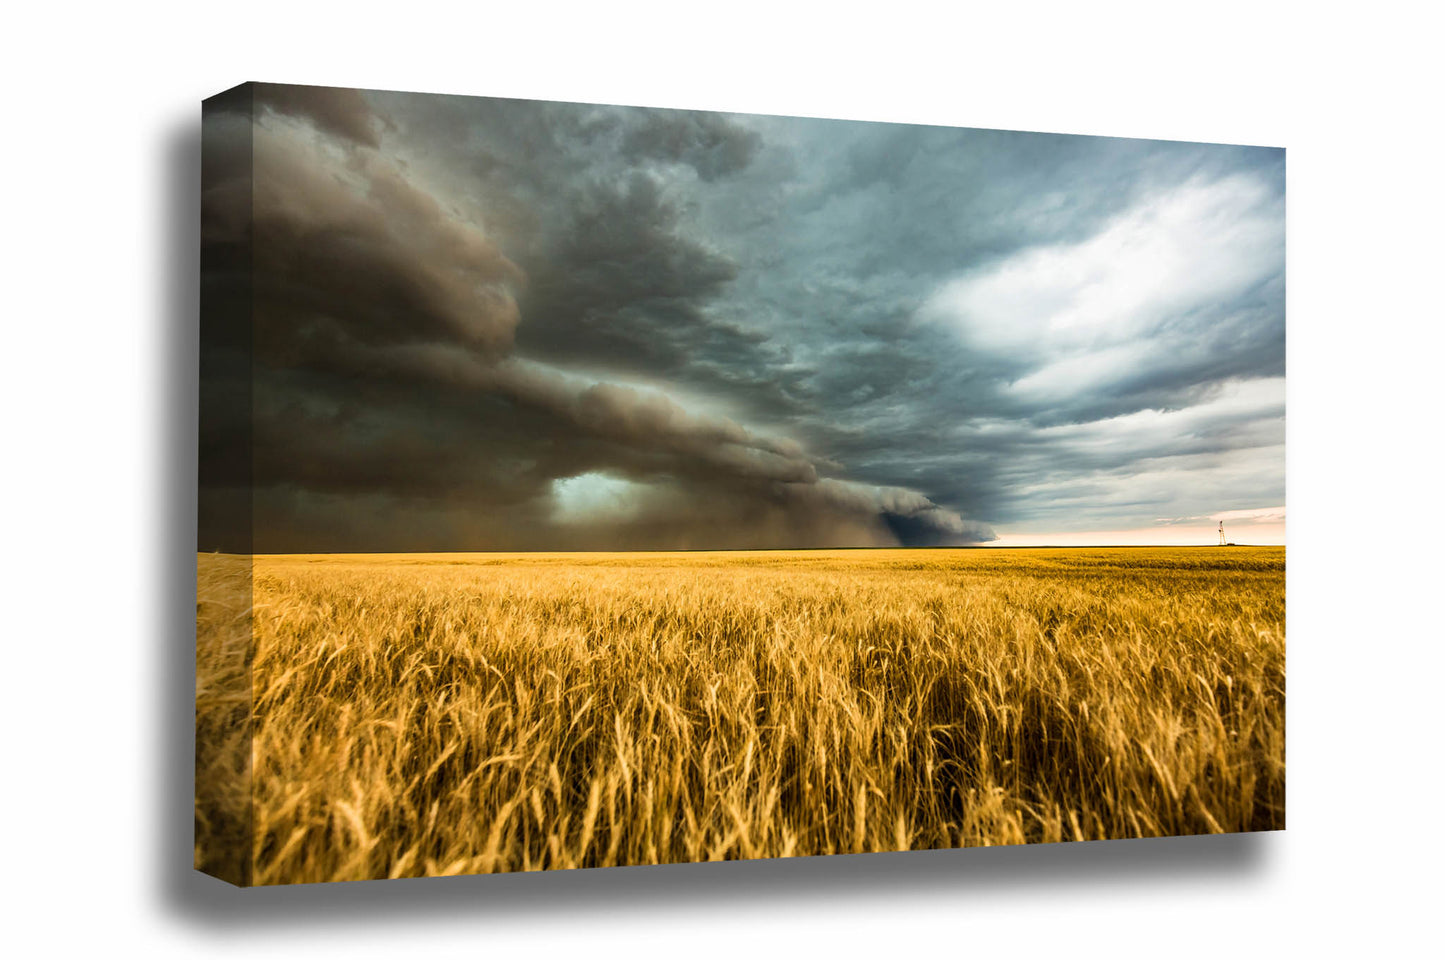 Storm canvas wall art of a haboob thunderstorm carrying dust over a golden wheat field on a stormy spring day on the plains of Colorado by Sean Ramsey of Southern Plains Photography.